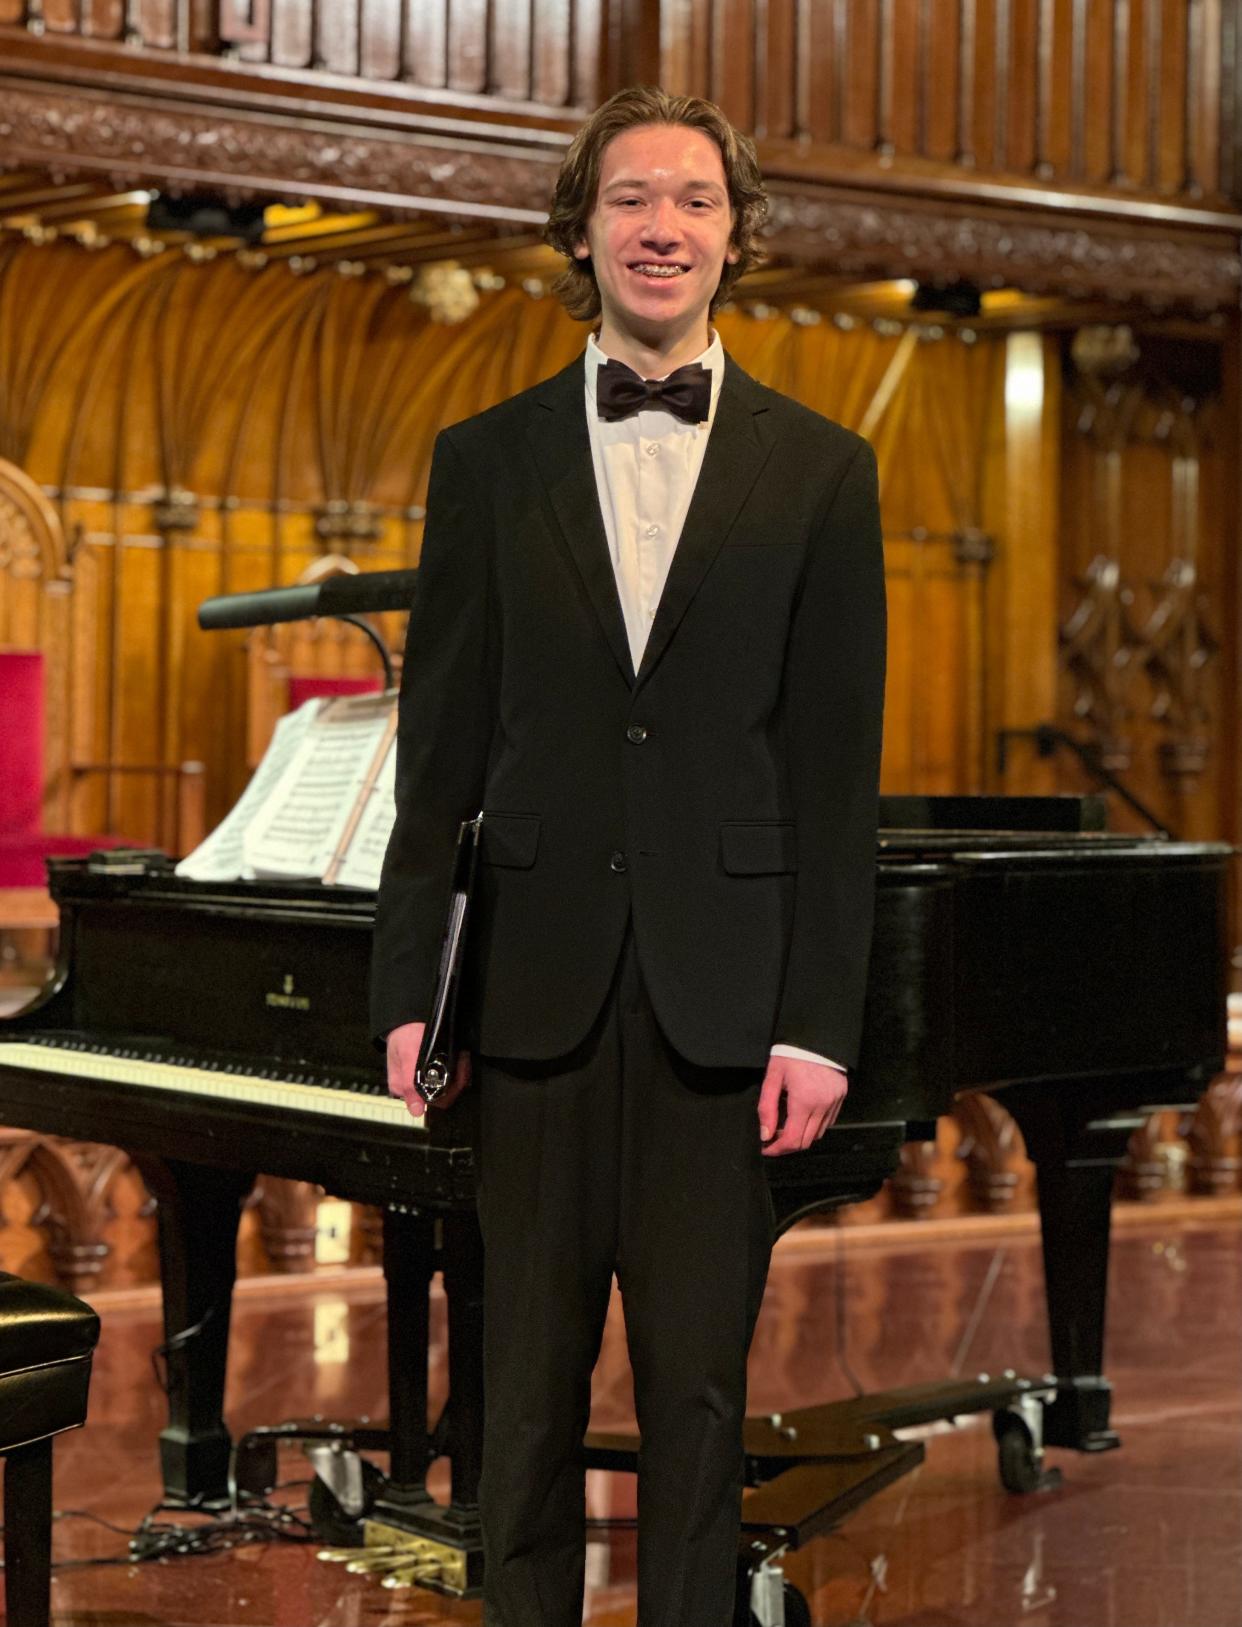 Hopewell High student Luke Ujhazy will entertain with the Mendelssohn Choir in a Heinz Hall show by the Pittsburgh Symphony Orchestra.